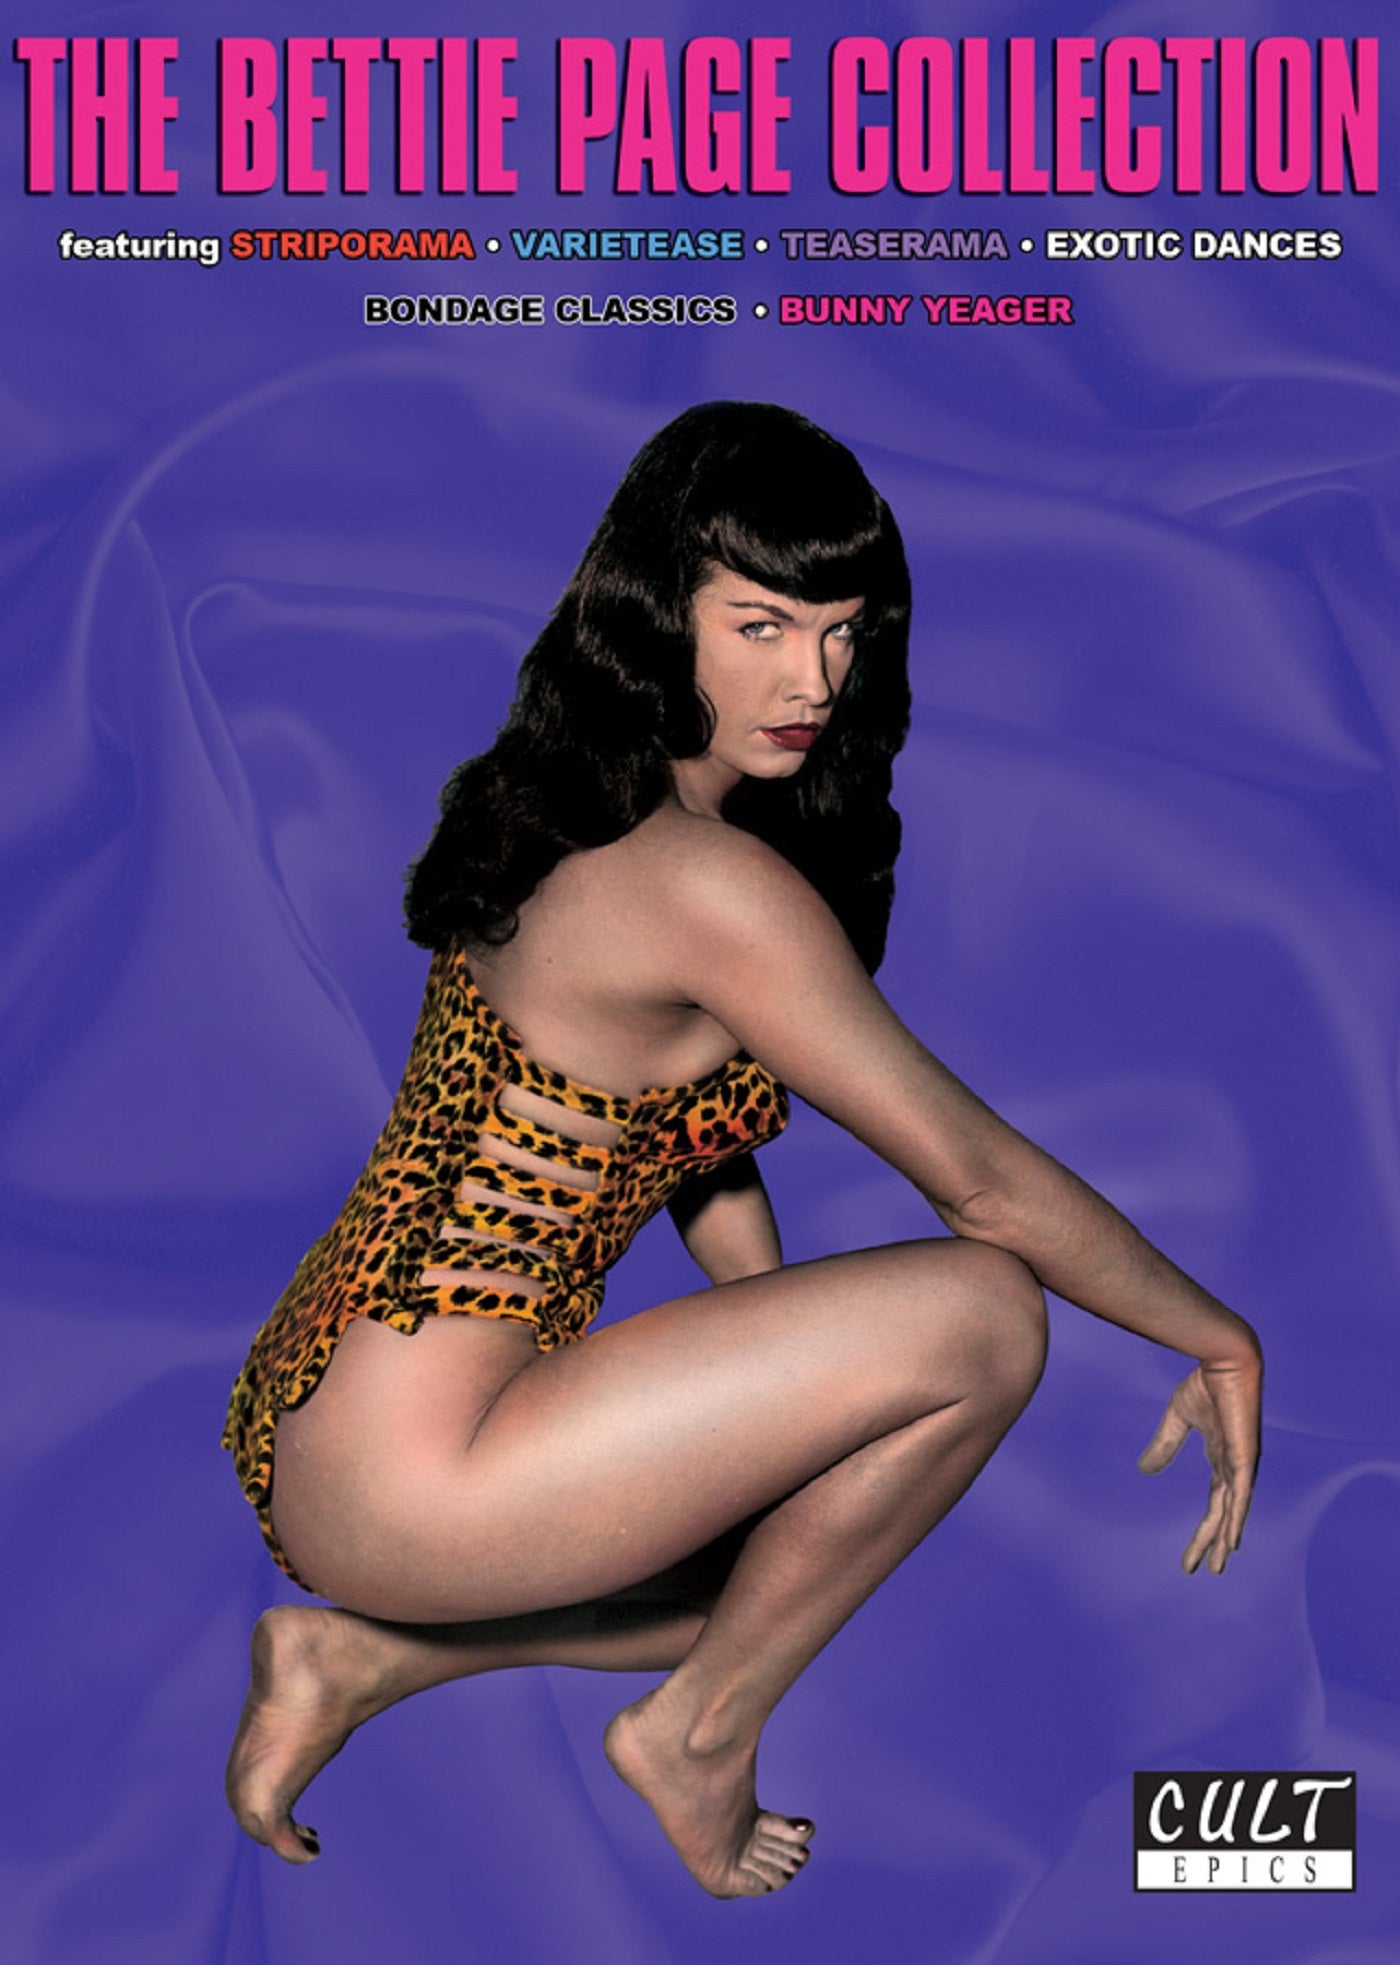 THE BETTIE PAGE COLLECTION DVD